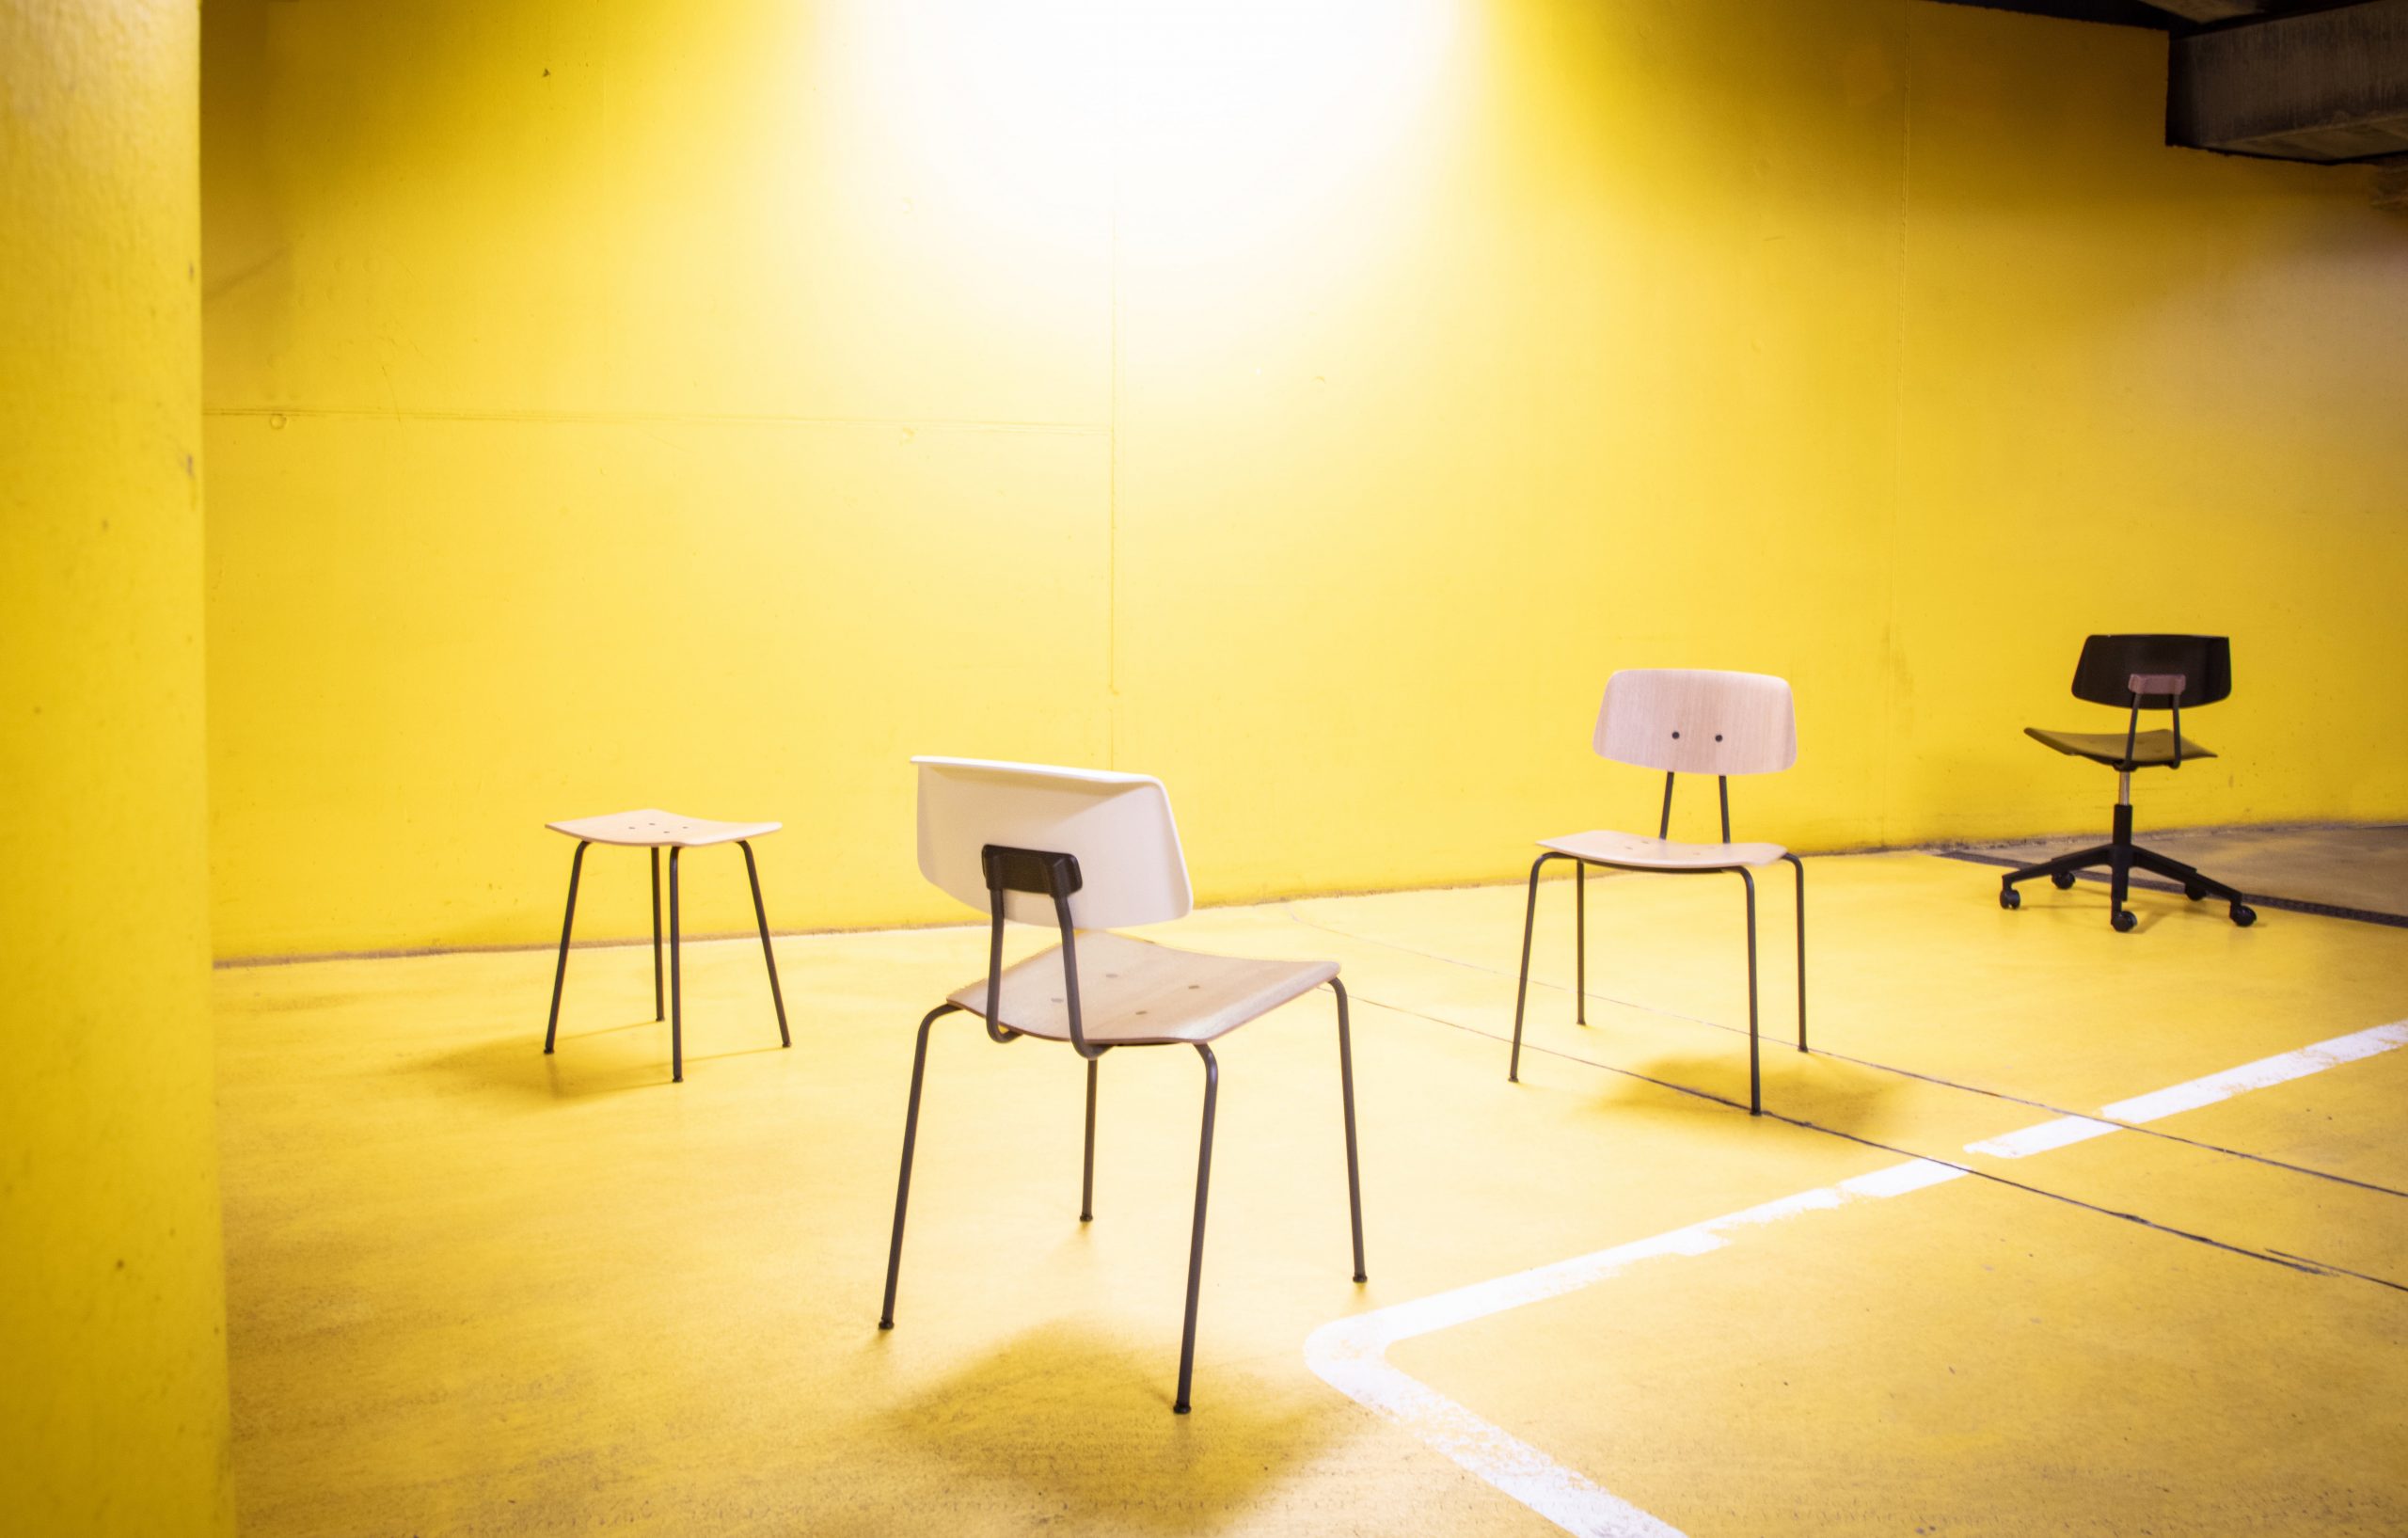 A group of Share office desk chairs and office stools and office benches on a yellow floor.